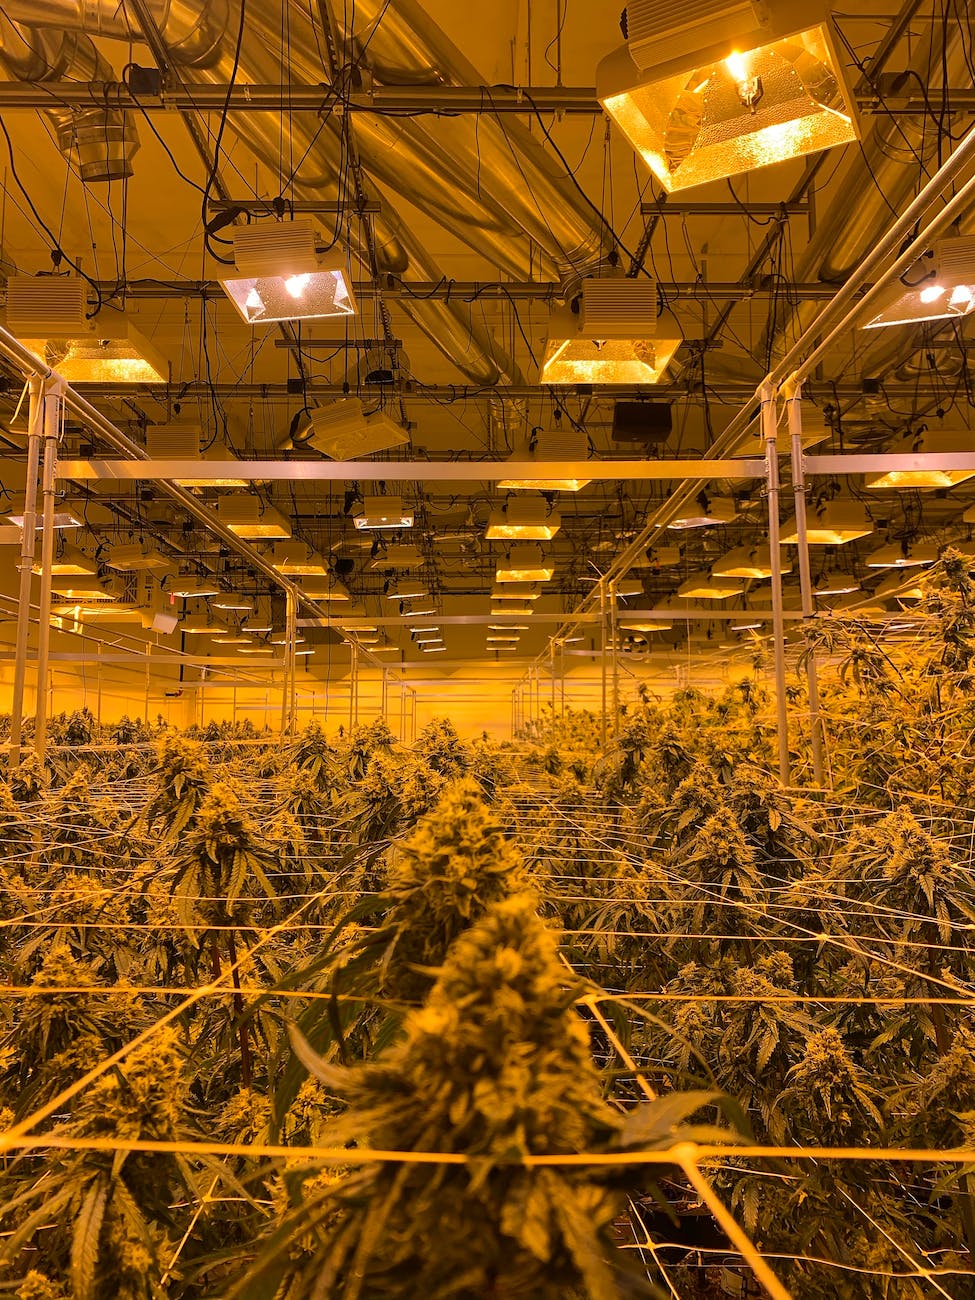 commercial cannabis growing under lamps